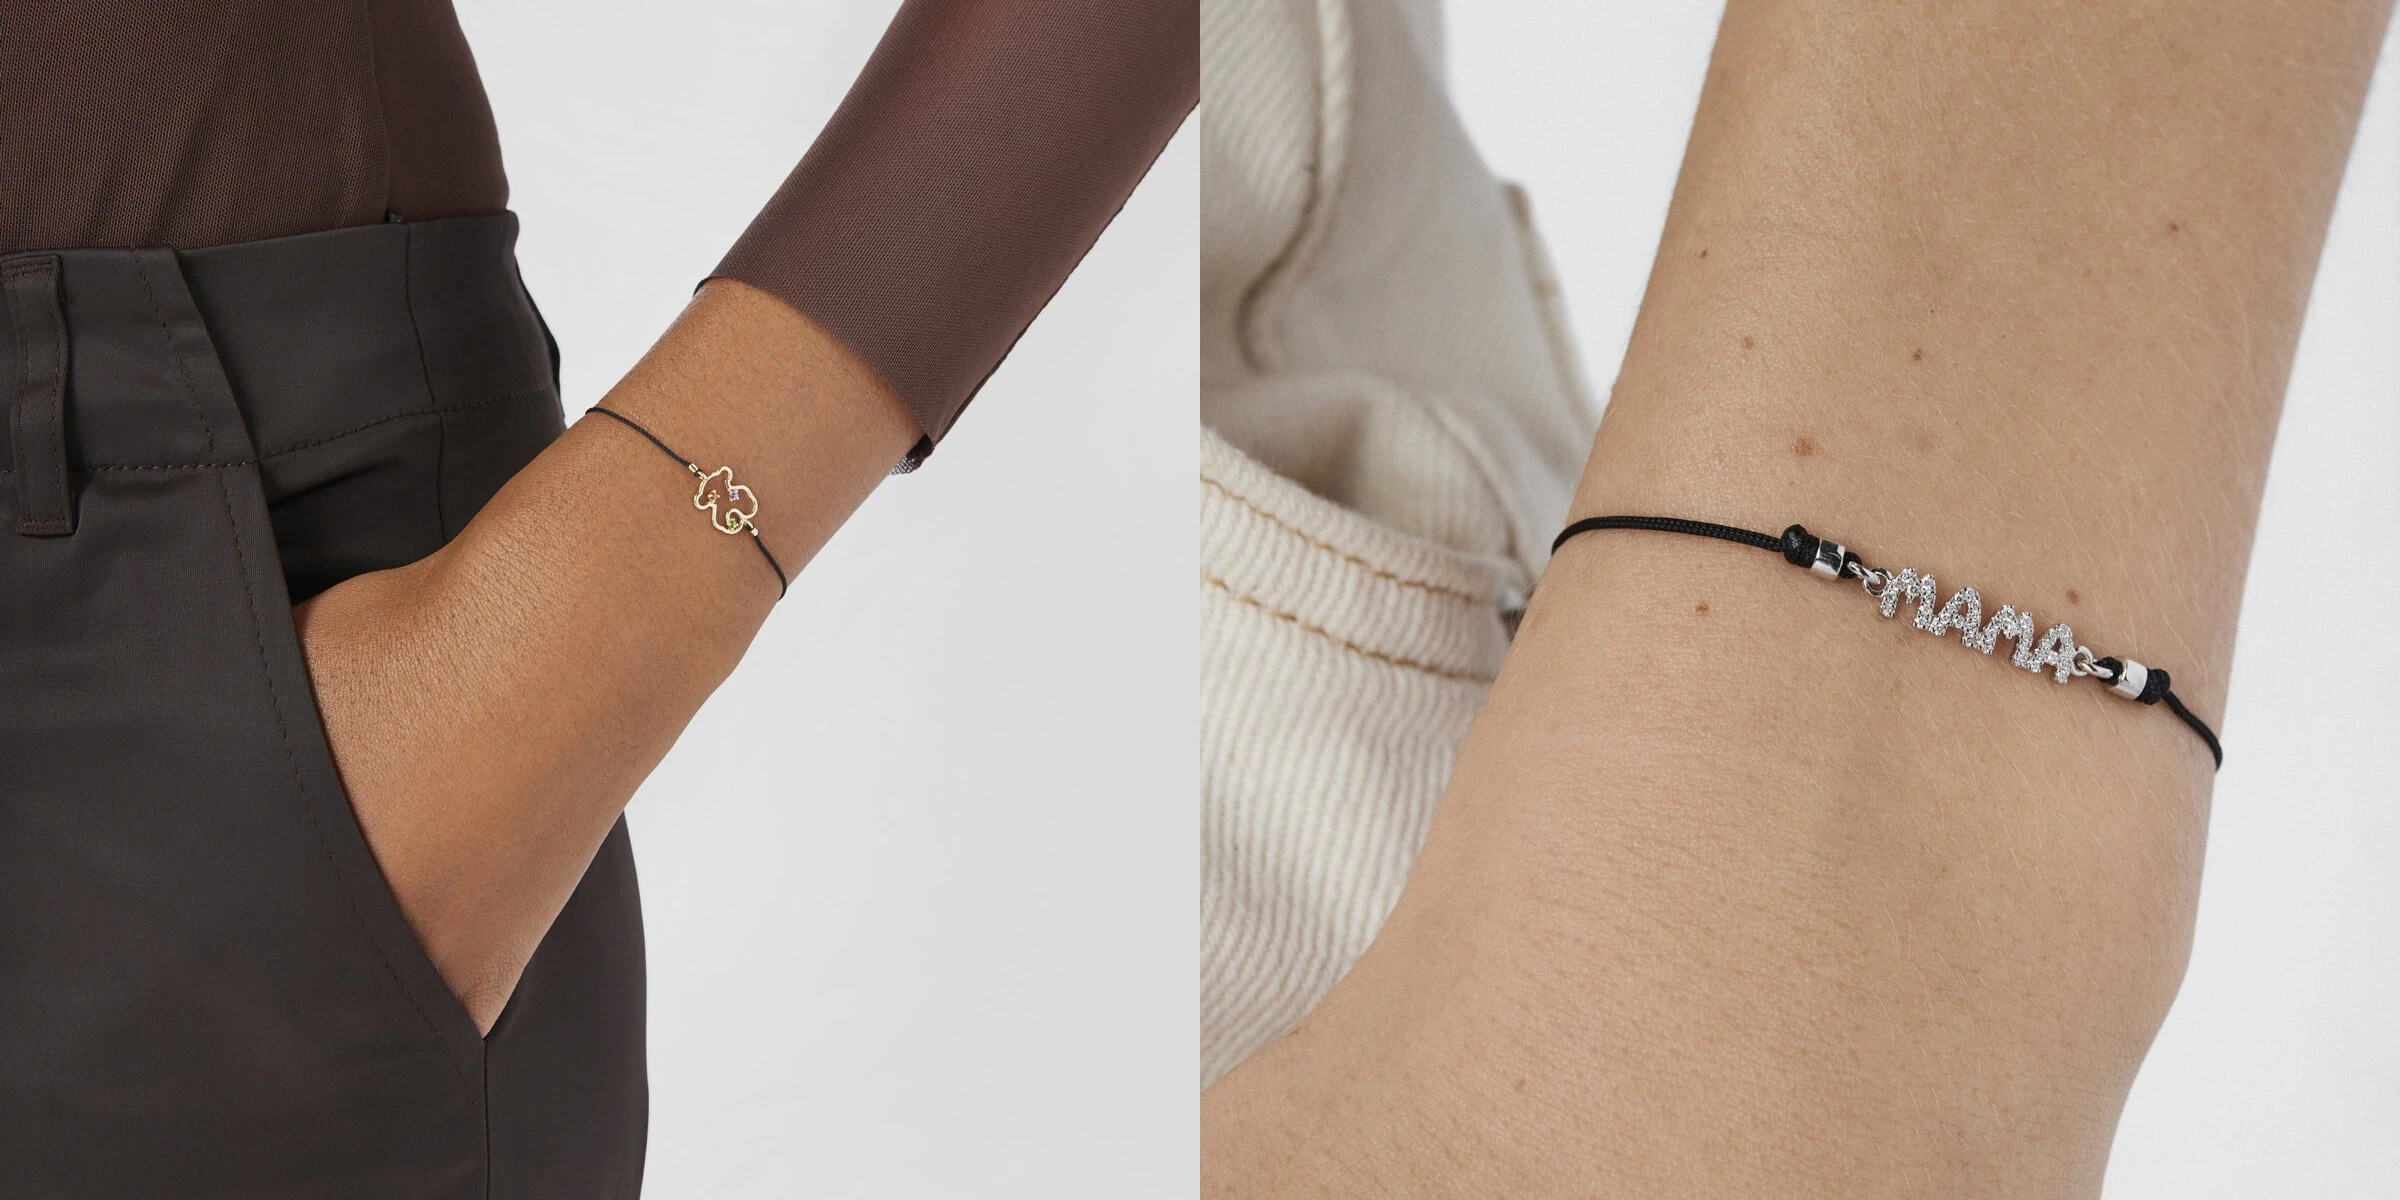 The most compatible bracelets for mother and daughter